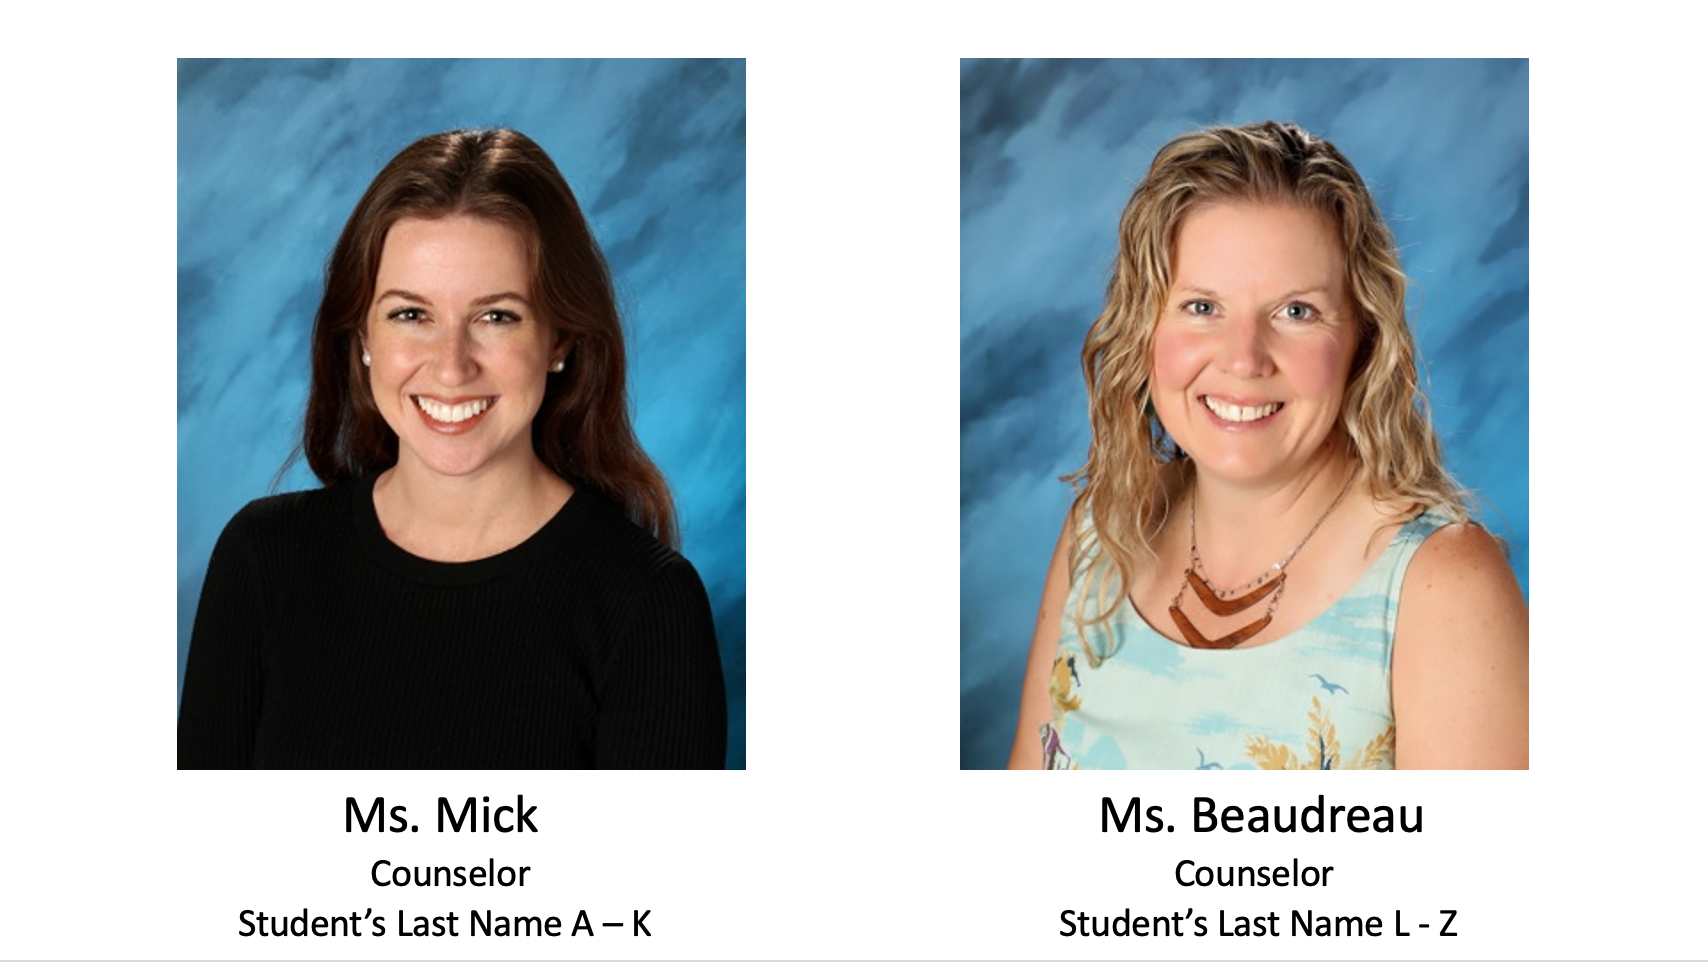 Staff Photos of Ms. Mick and Ms. Beadreau